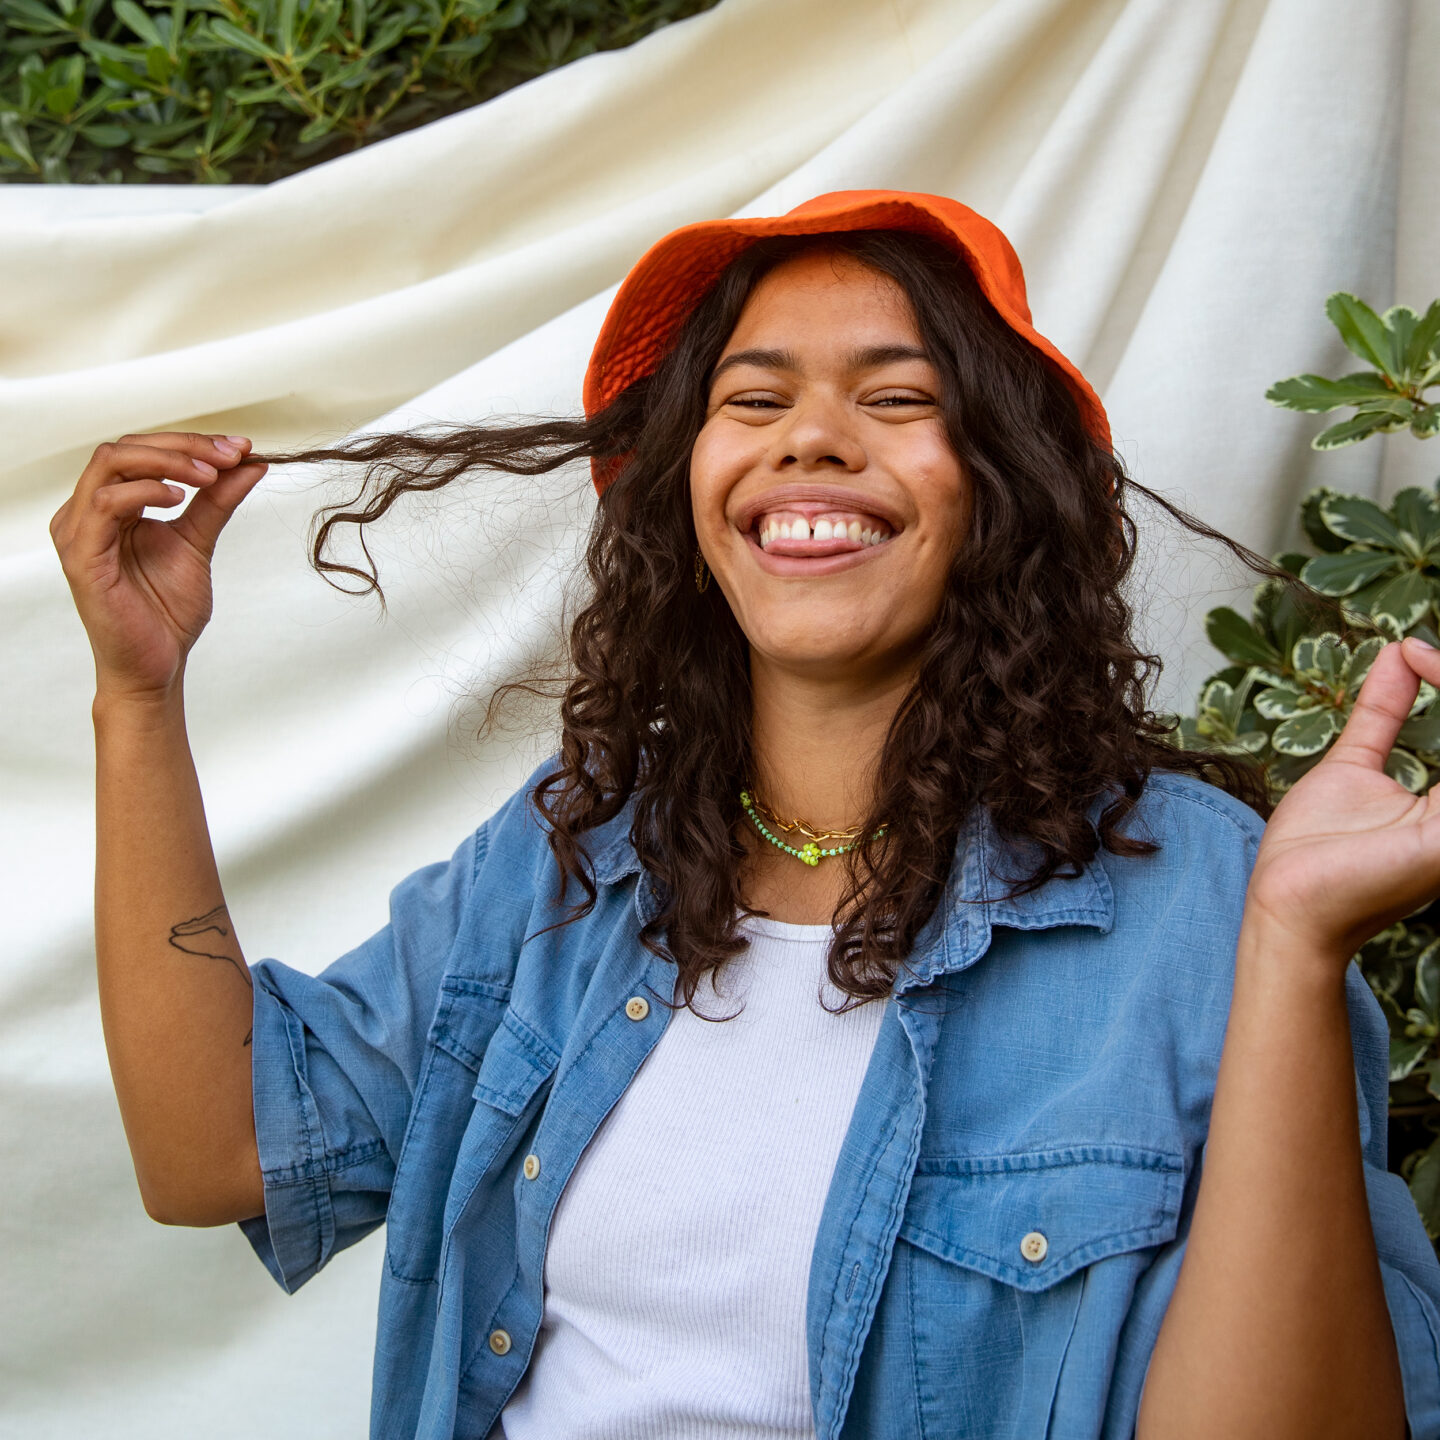 Young person laughing, standing outside in front of a neutral fabric backdrop